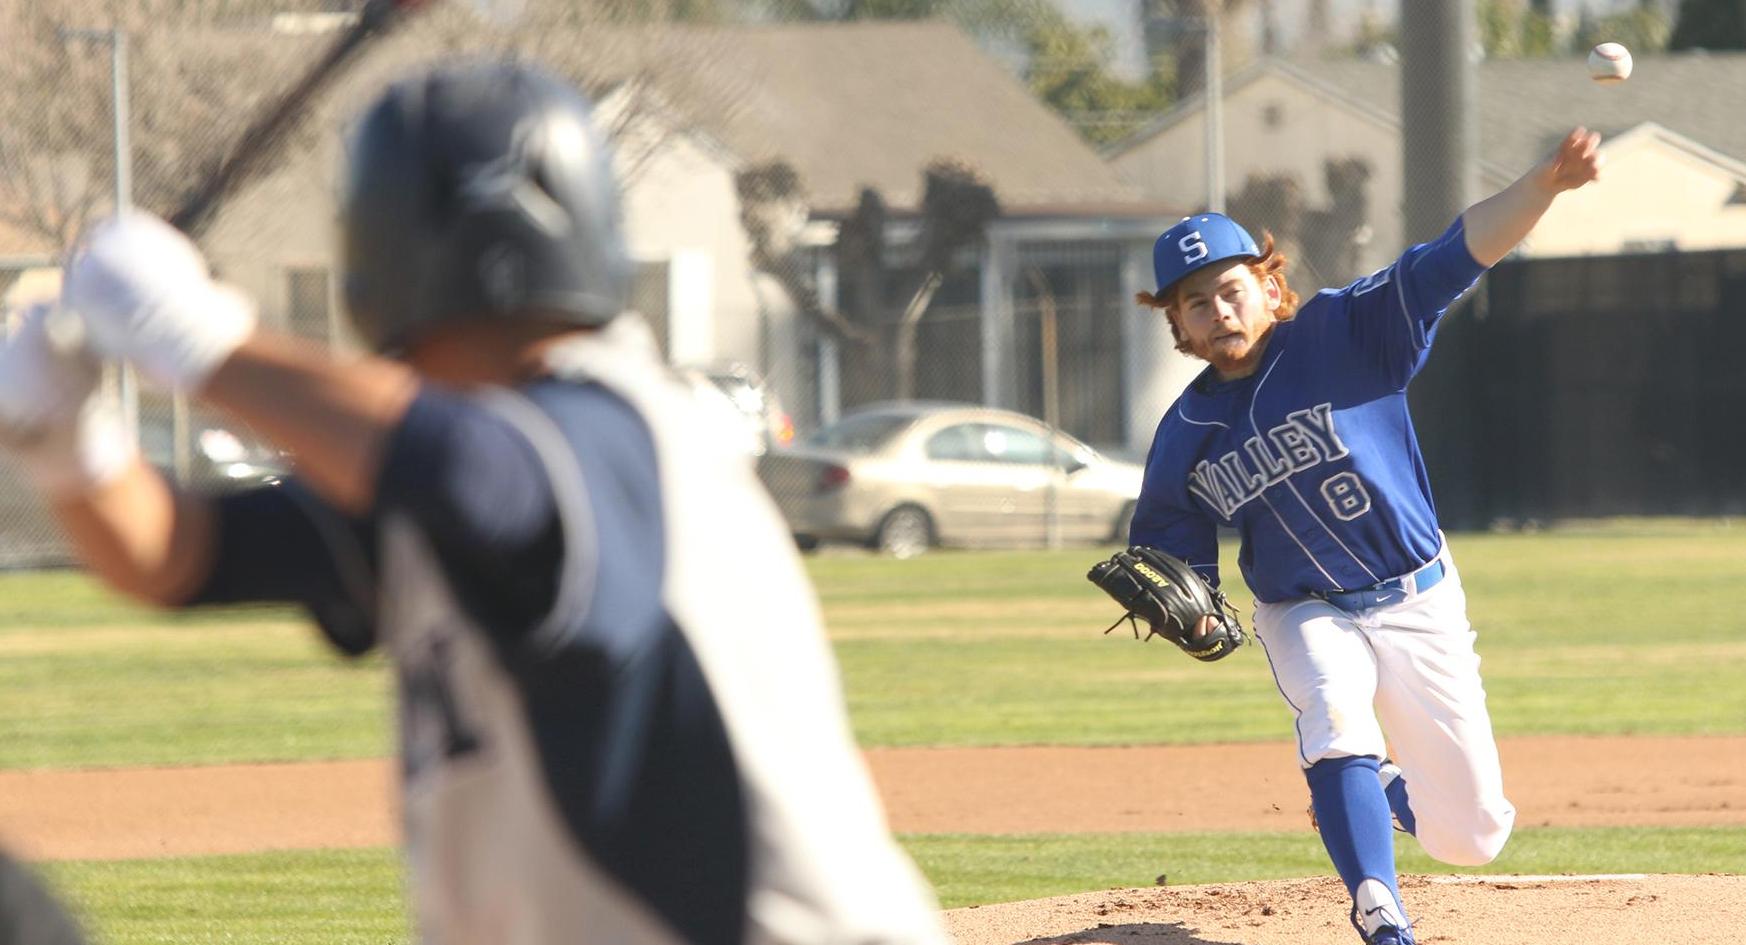 SBVC Baseball comes back to tie, as game is called versus Owls, 5-5